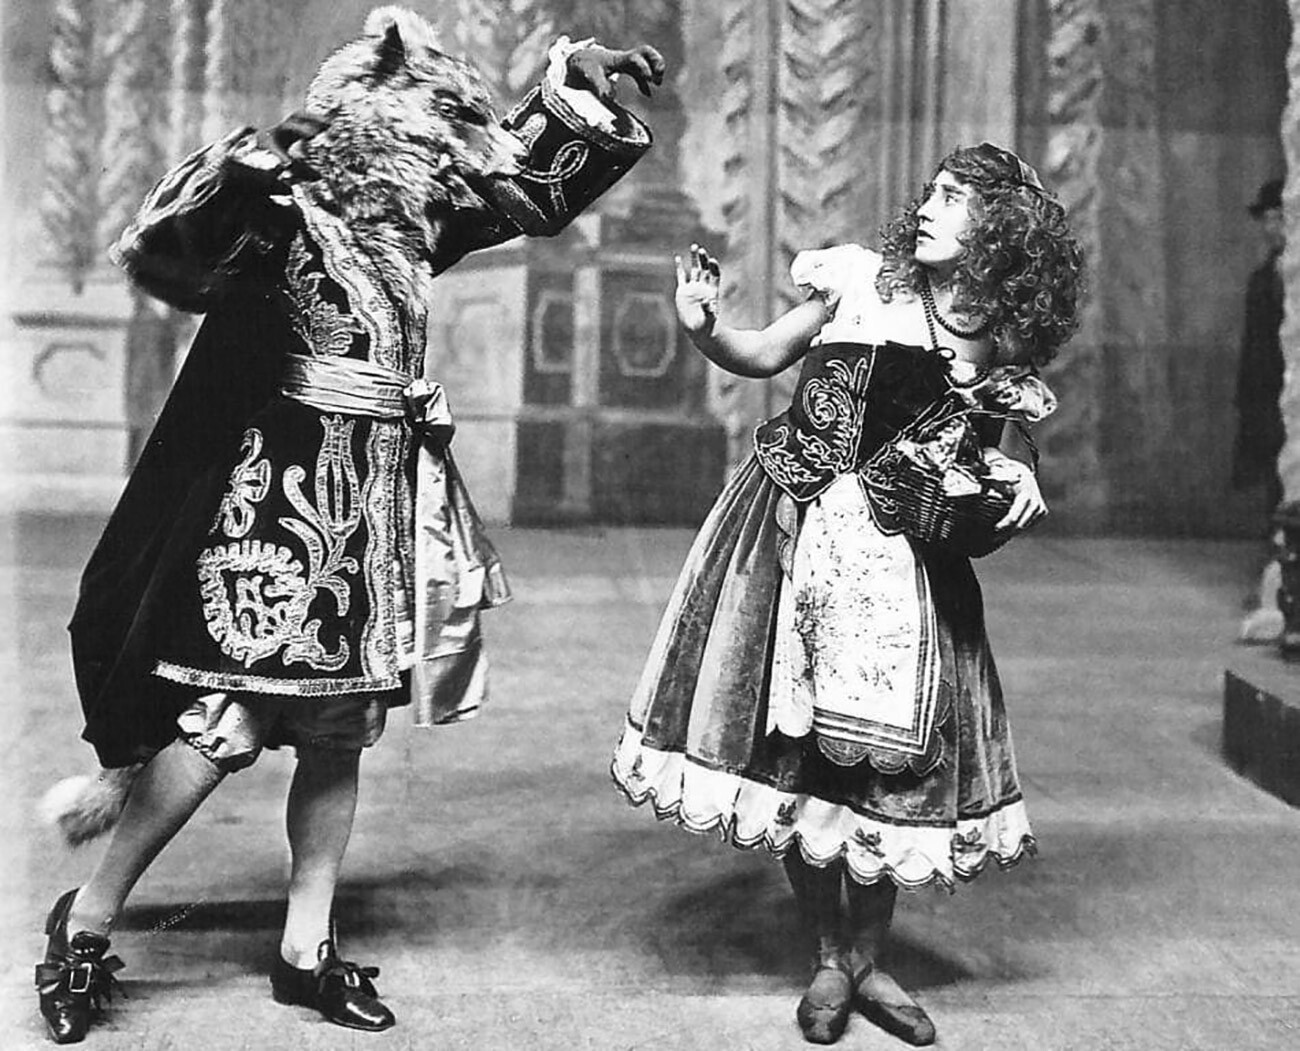 A scene from the ballet with the Red Riding Hood and the Wolf